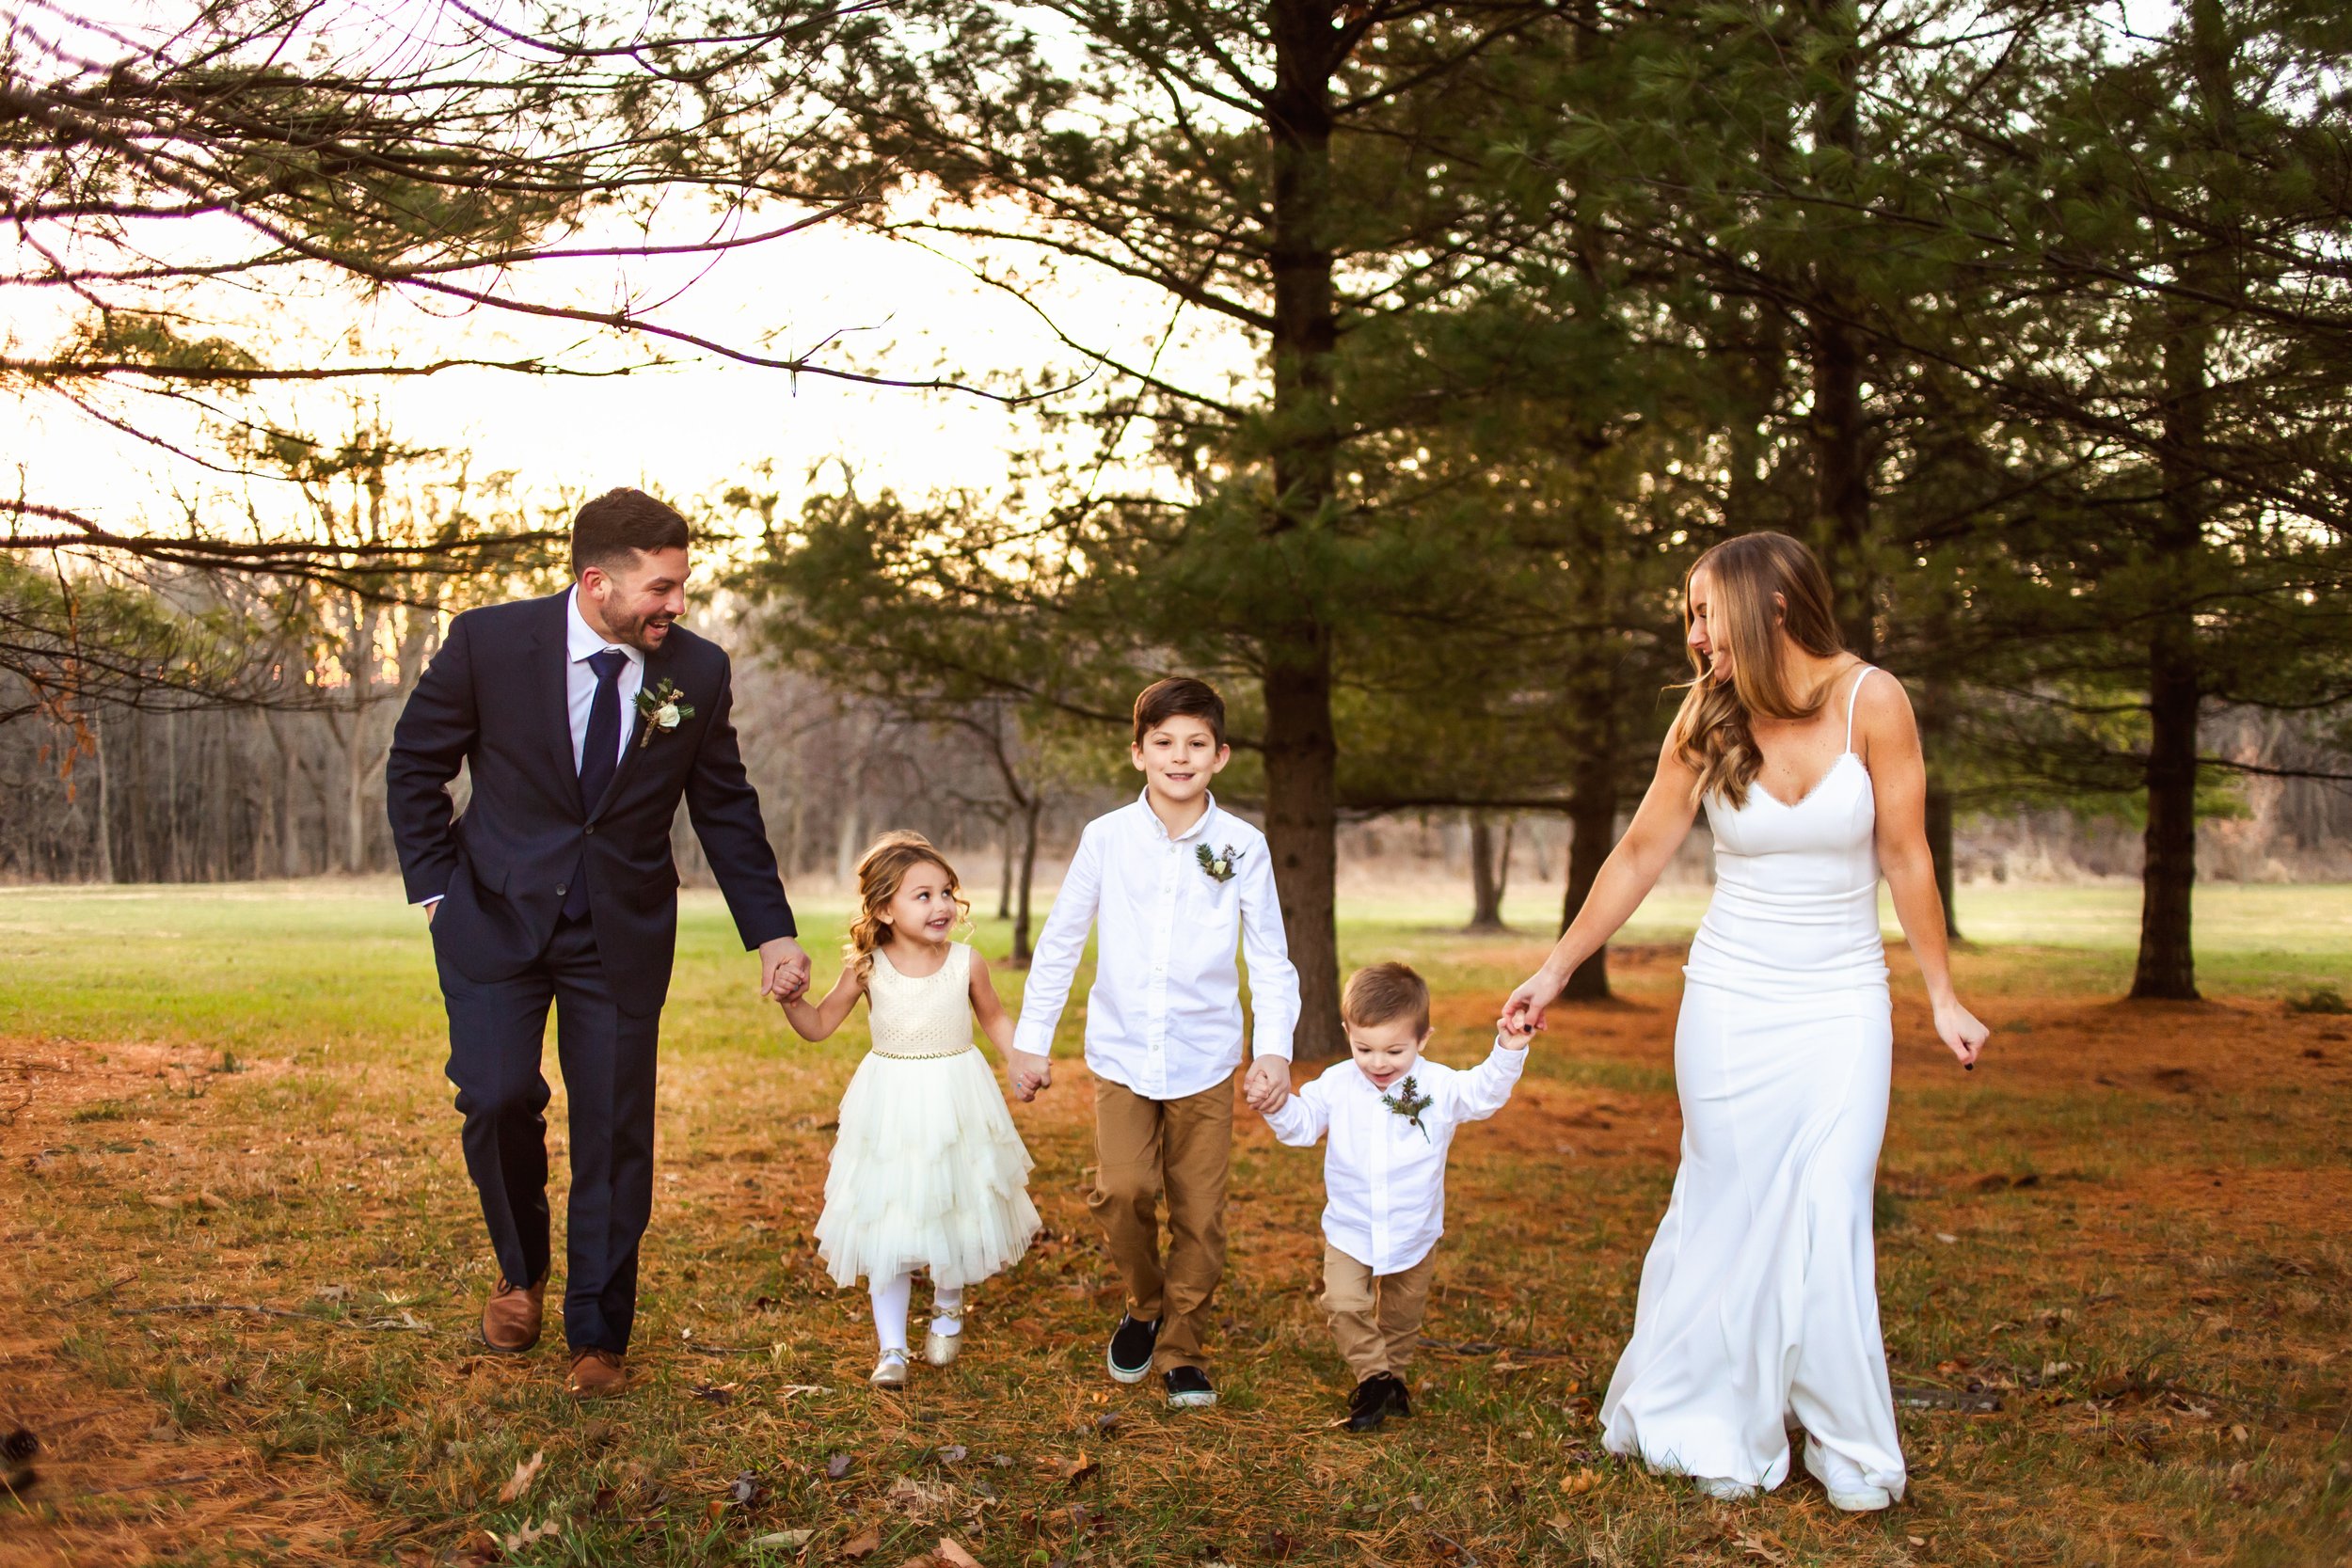  Bride and groom walk with their children while holding hands at Ironwood on the Vermillion by Teala Ward Photography. wedding with kids babies #tealawardphotography #tealawardweddings #LaSalleIllinois #IronwoodontheVermillion #weddingphotographyIL 